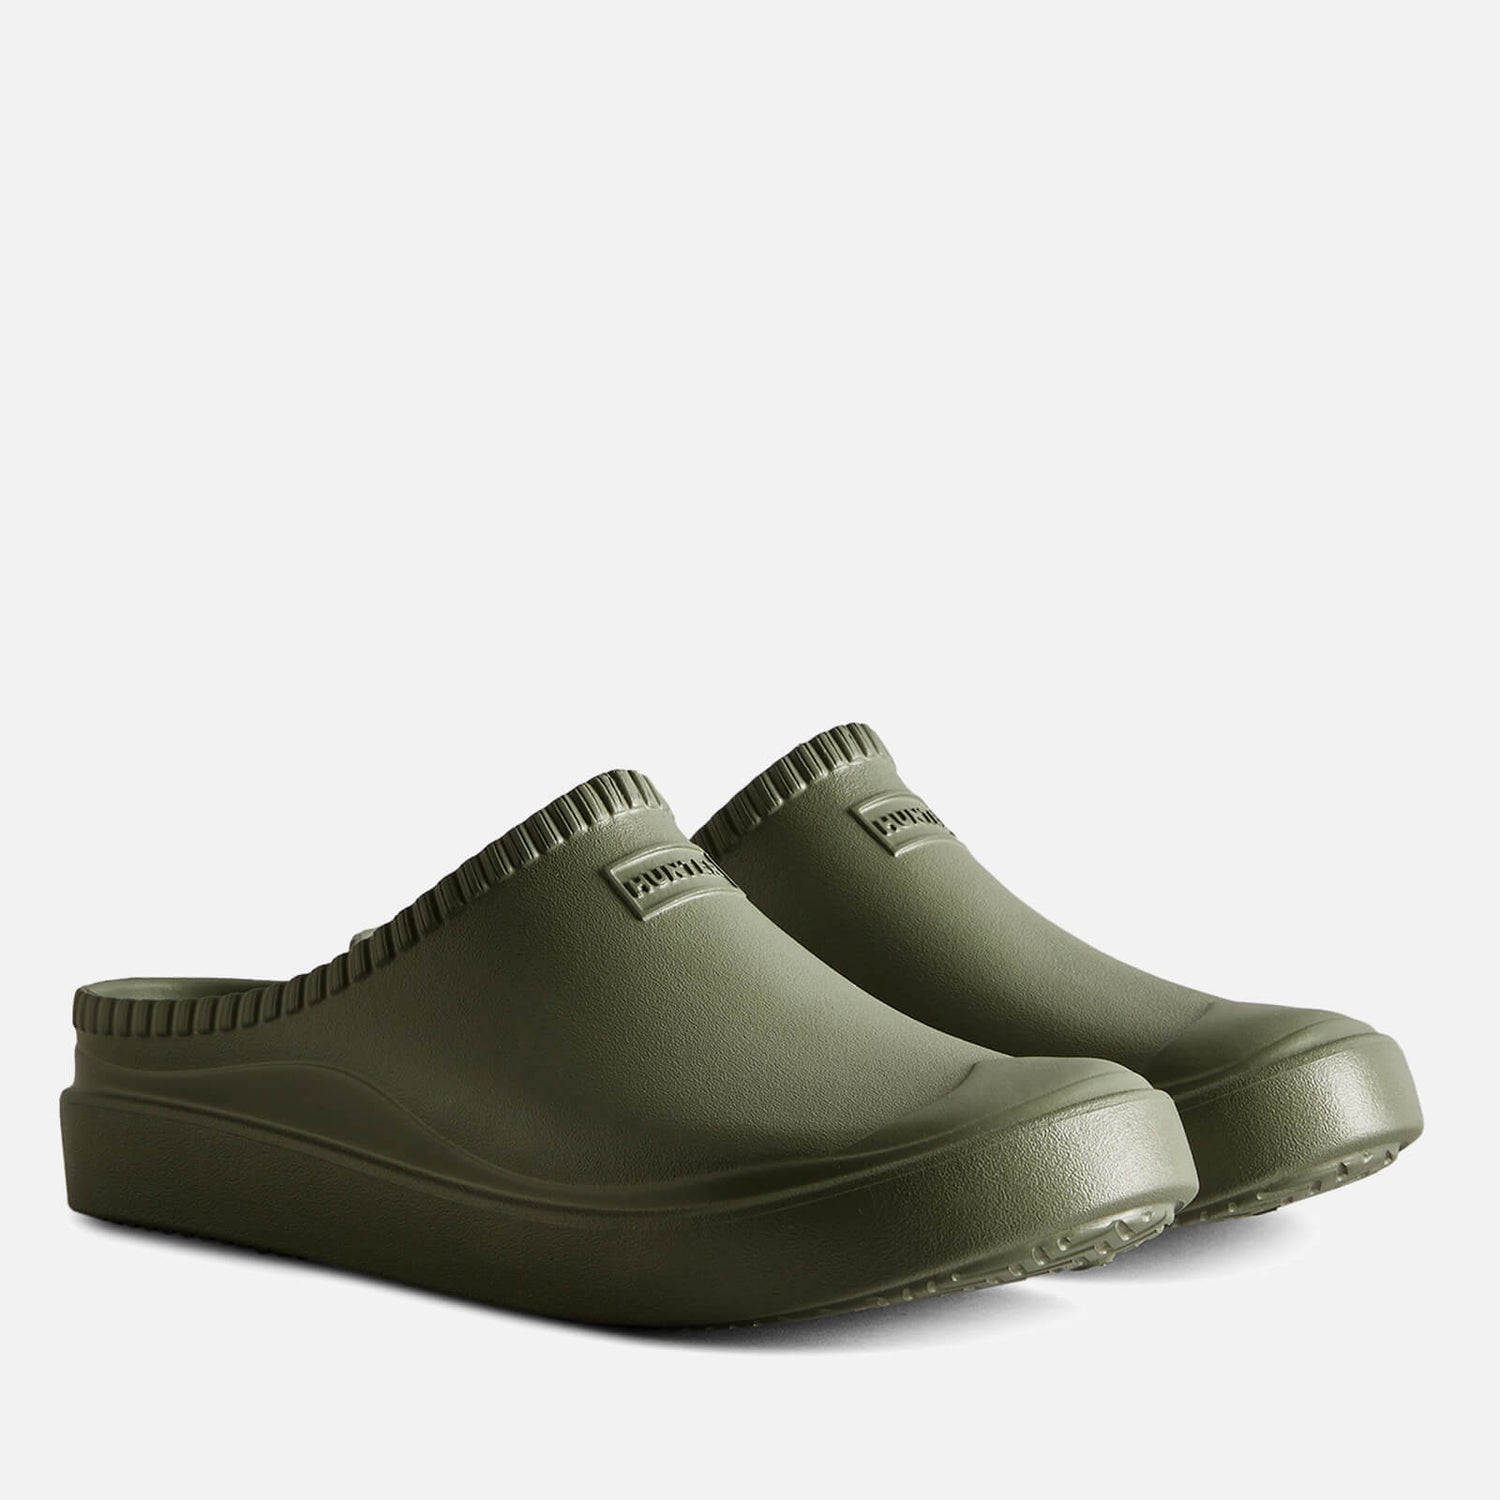 Hunter In/Out Bloom Rubber Clogs - UK 7